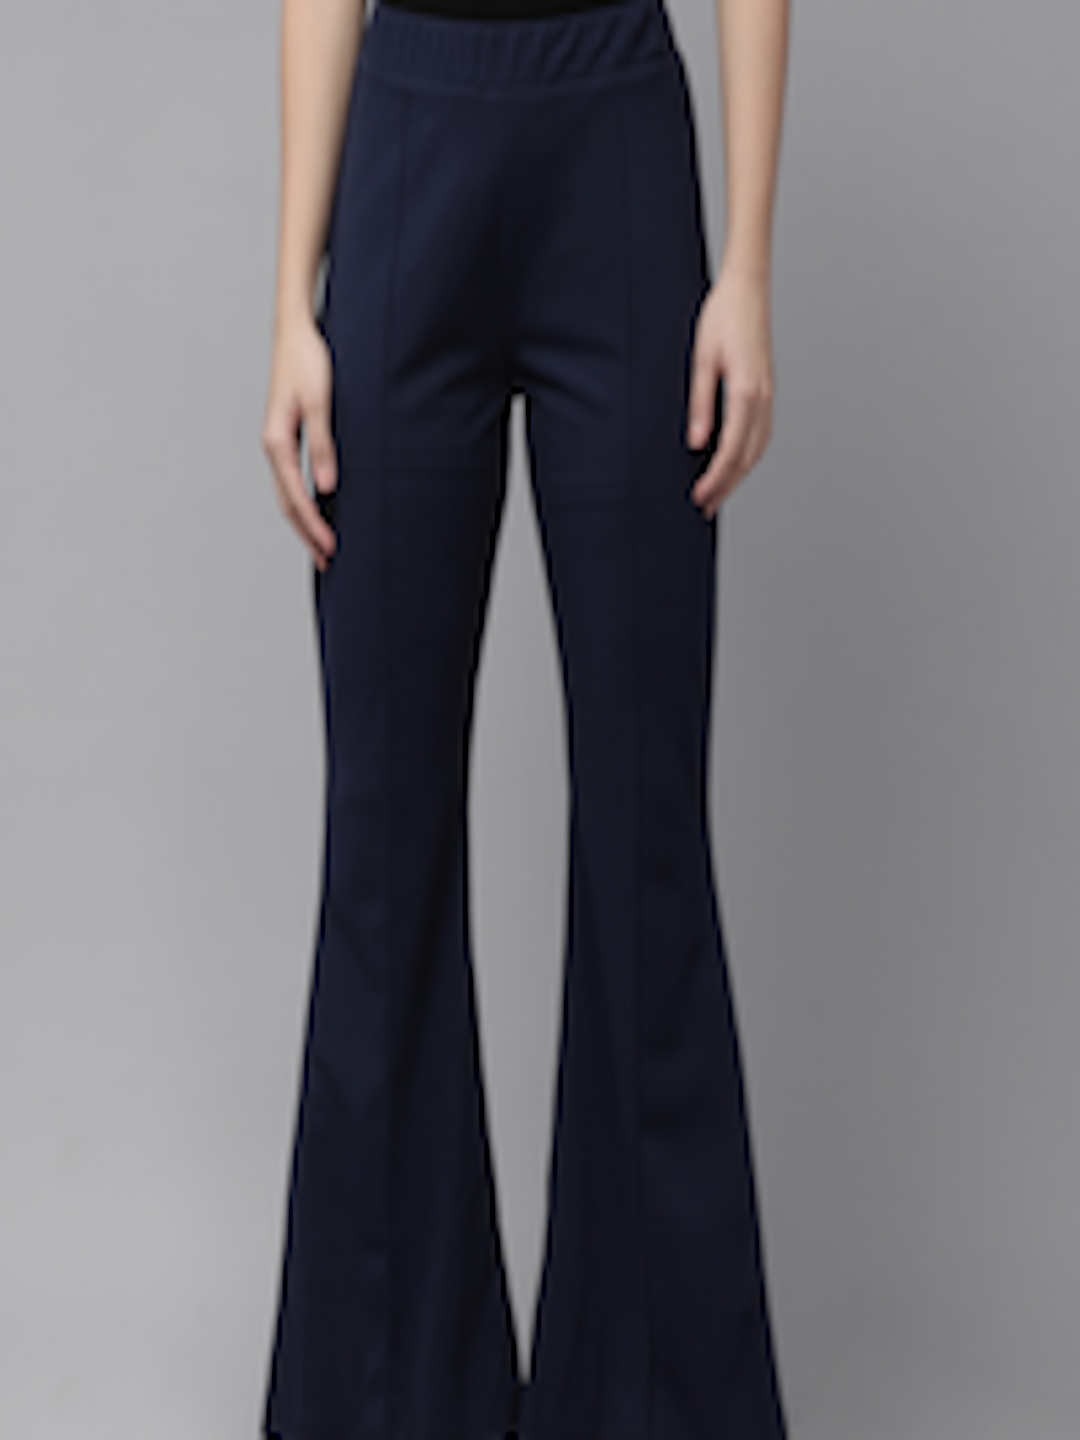 Buy RARE Women Navy Blue Solid Flared Trousers - Trousers for Women ...